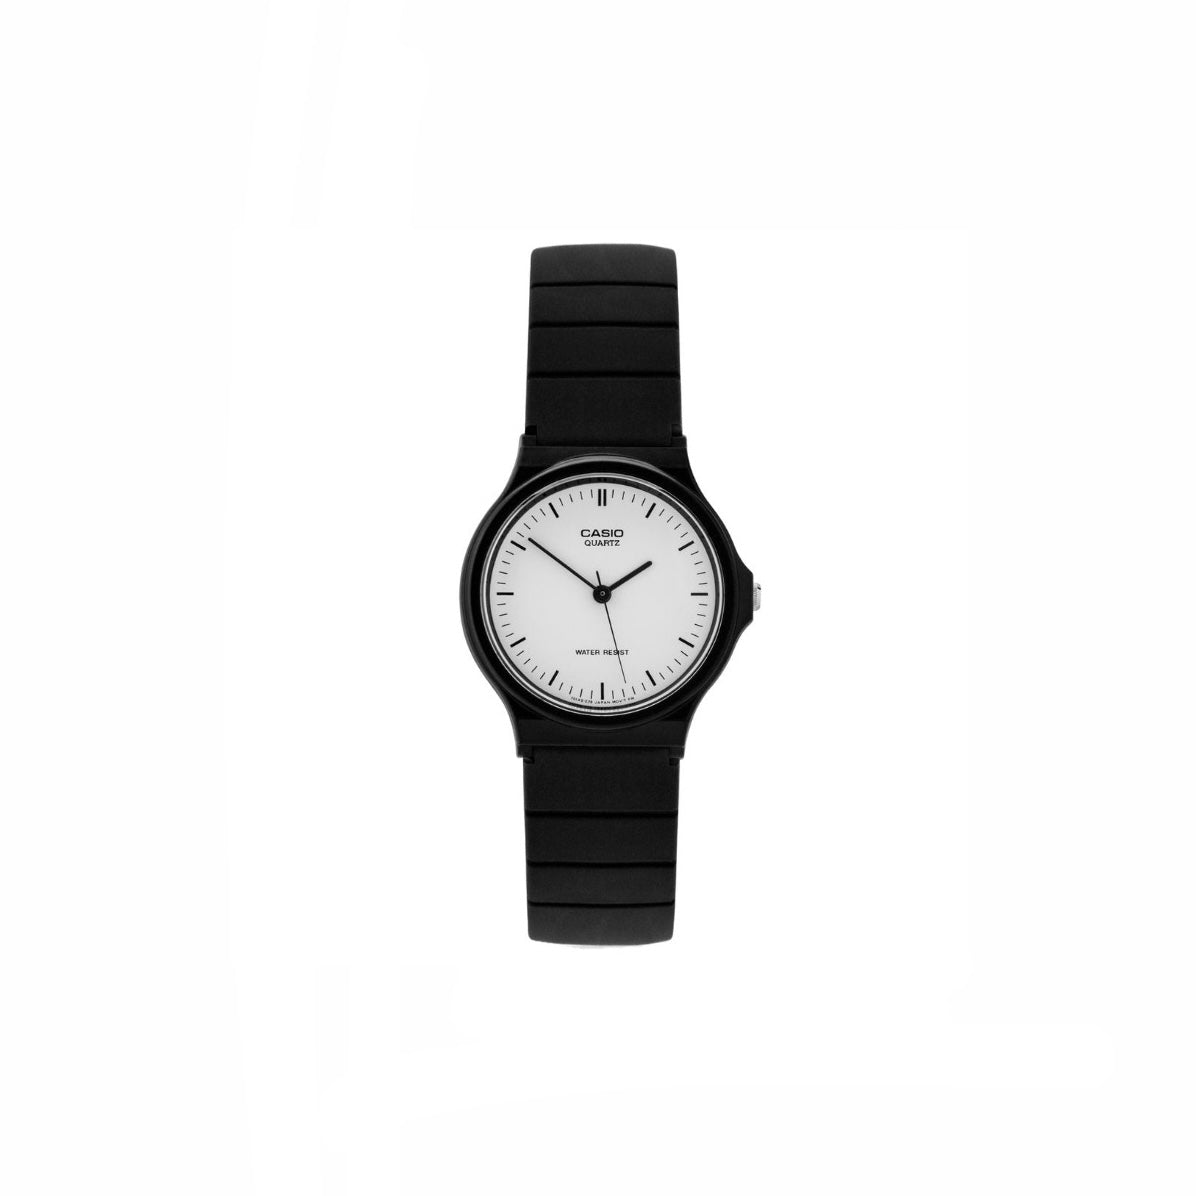 Casio Men's Black Resin Strap Watch with White Dial (9647)